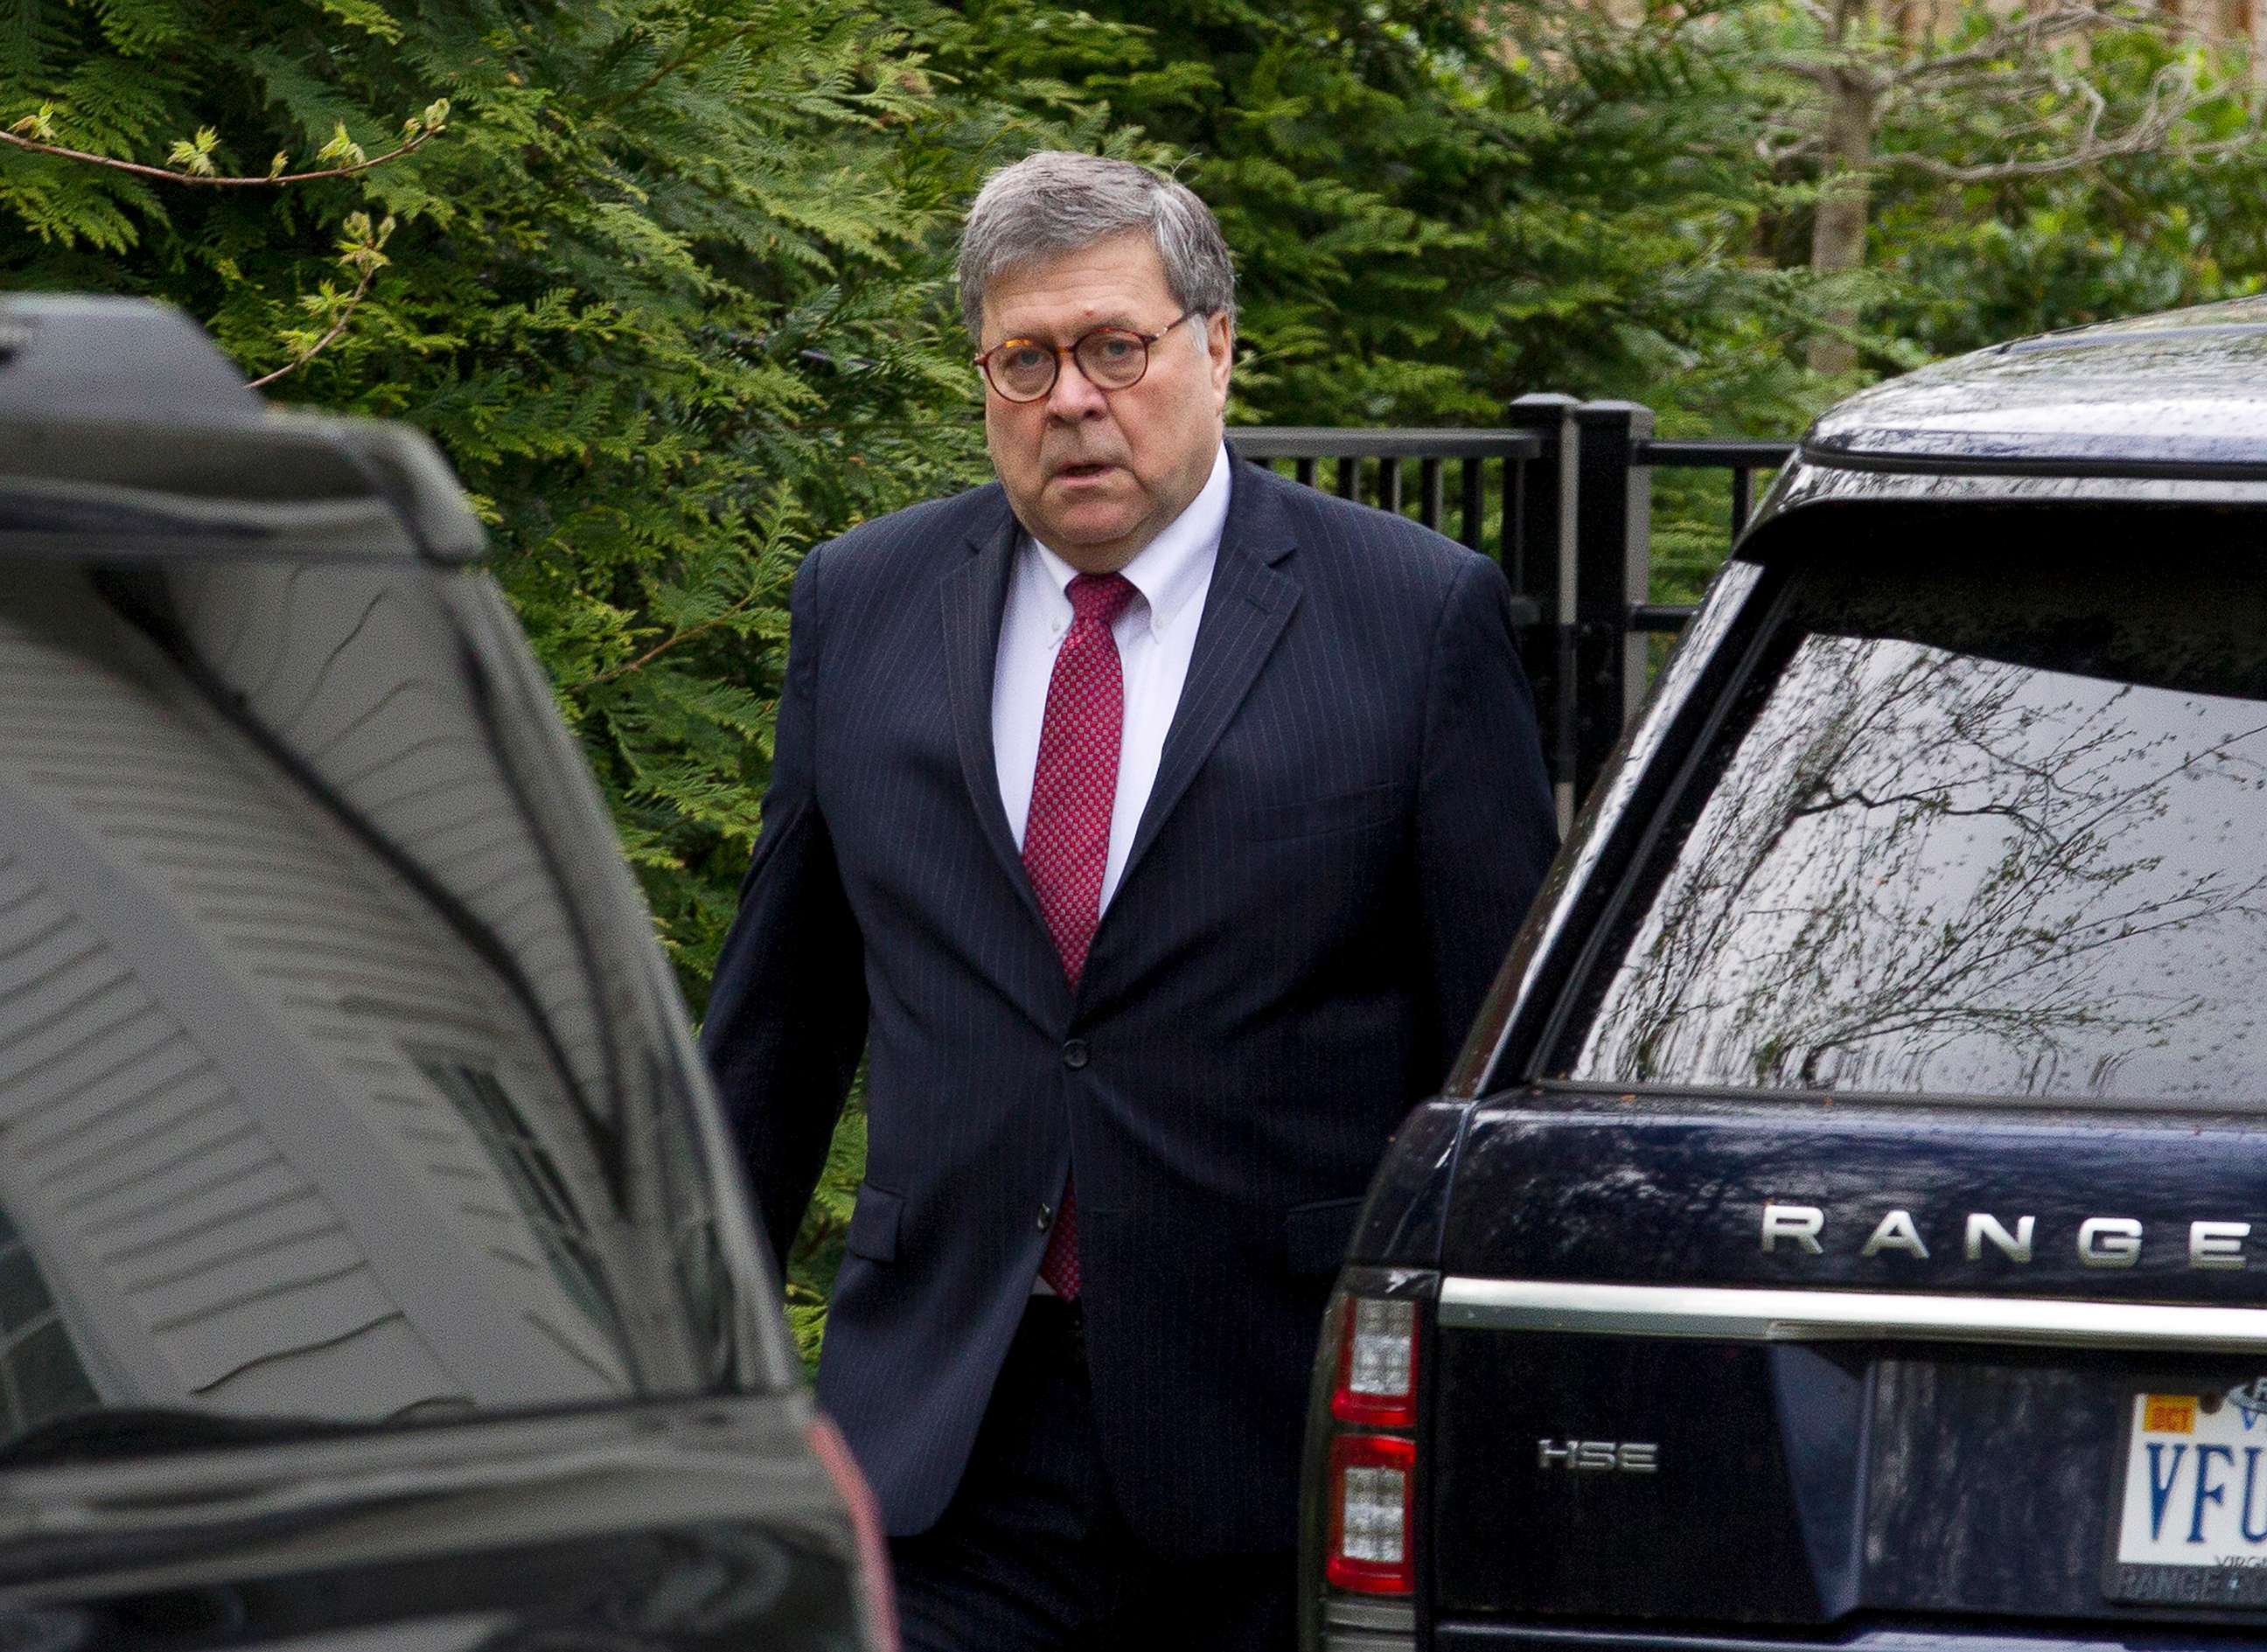 PHOTO: Attorney General William Barr leaves his home in McLean, Va., April 15, 2019.